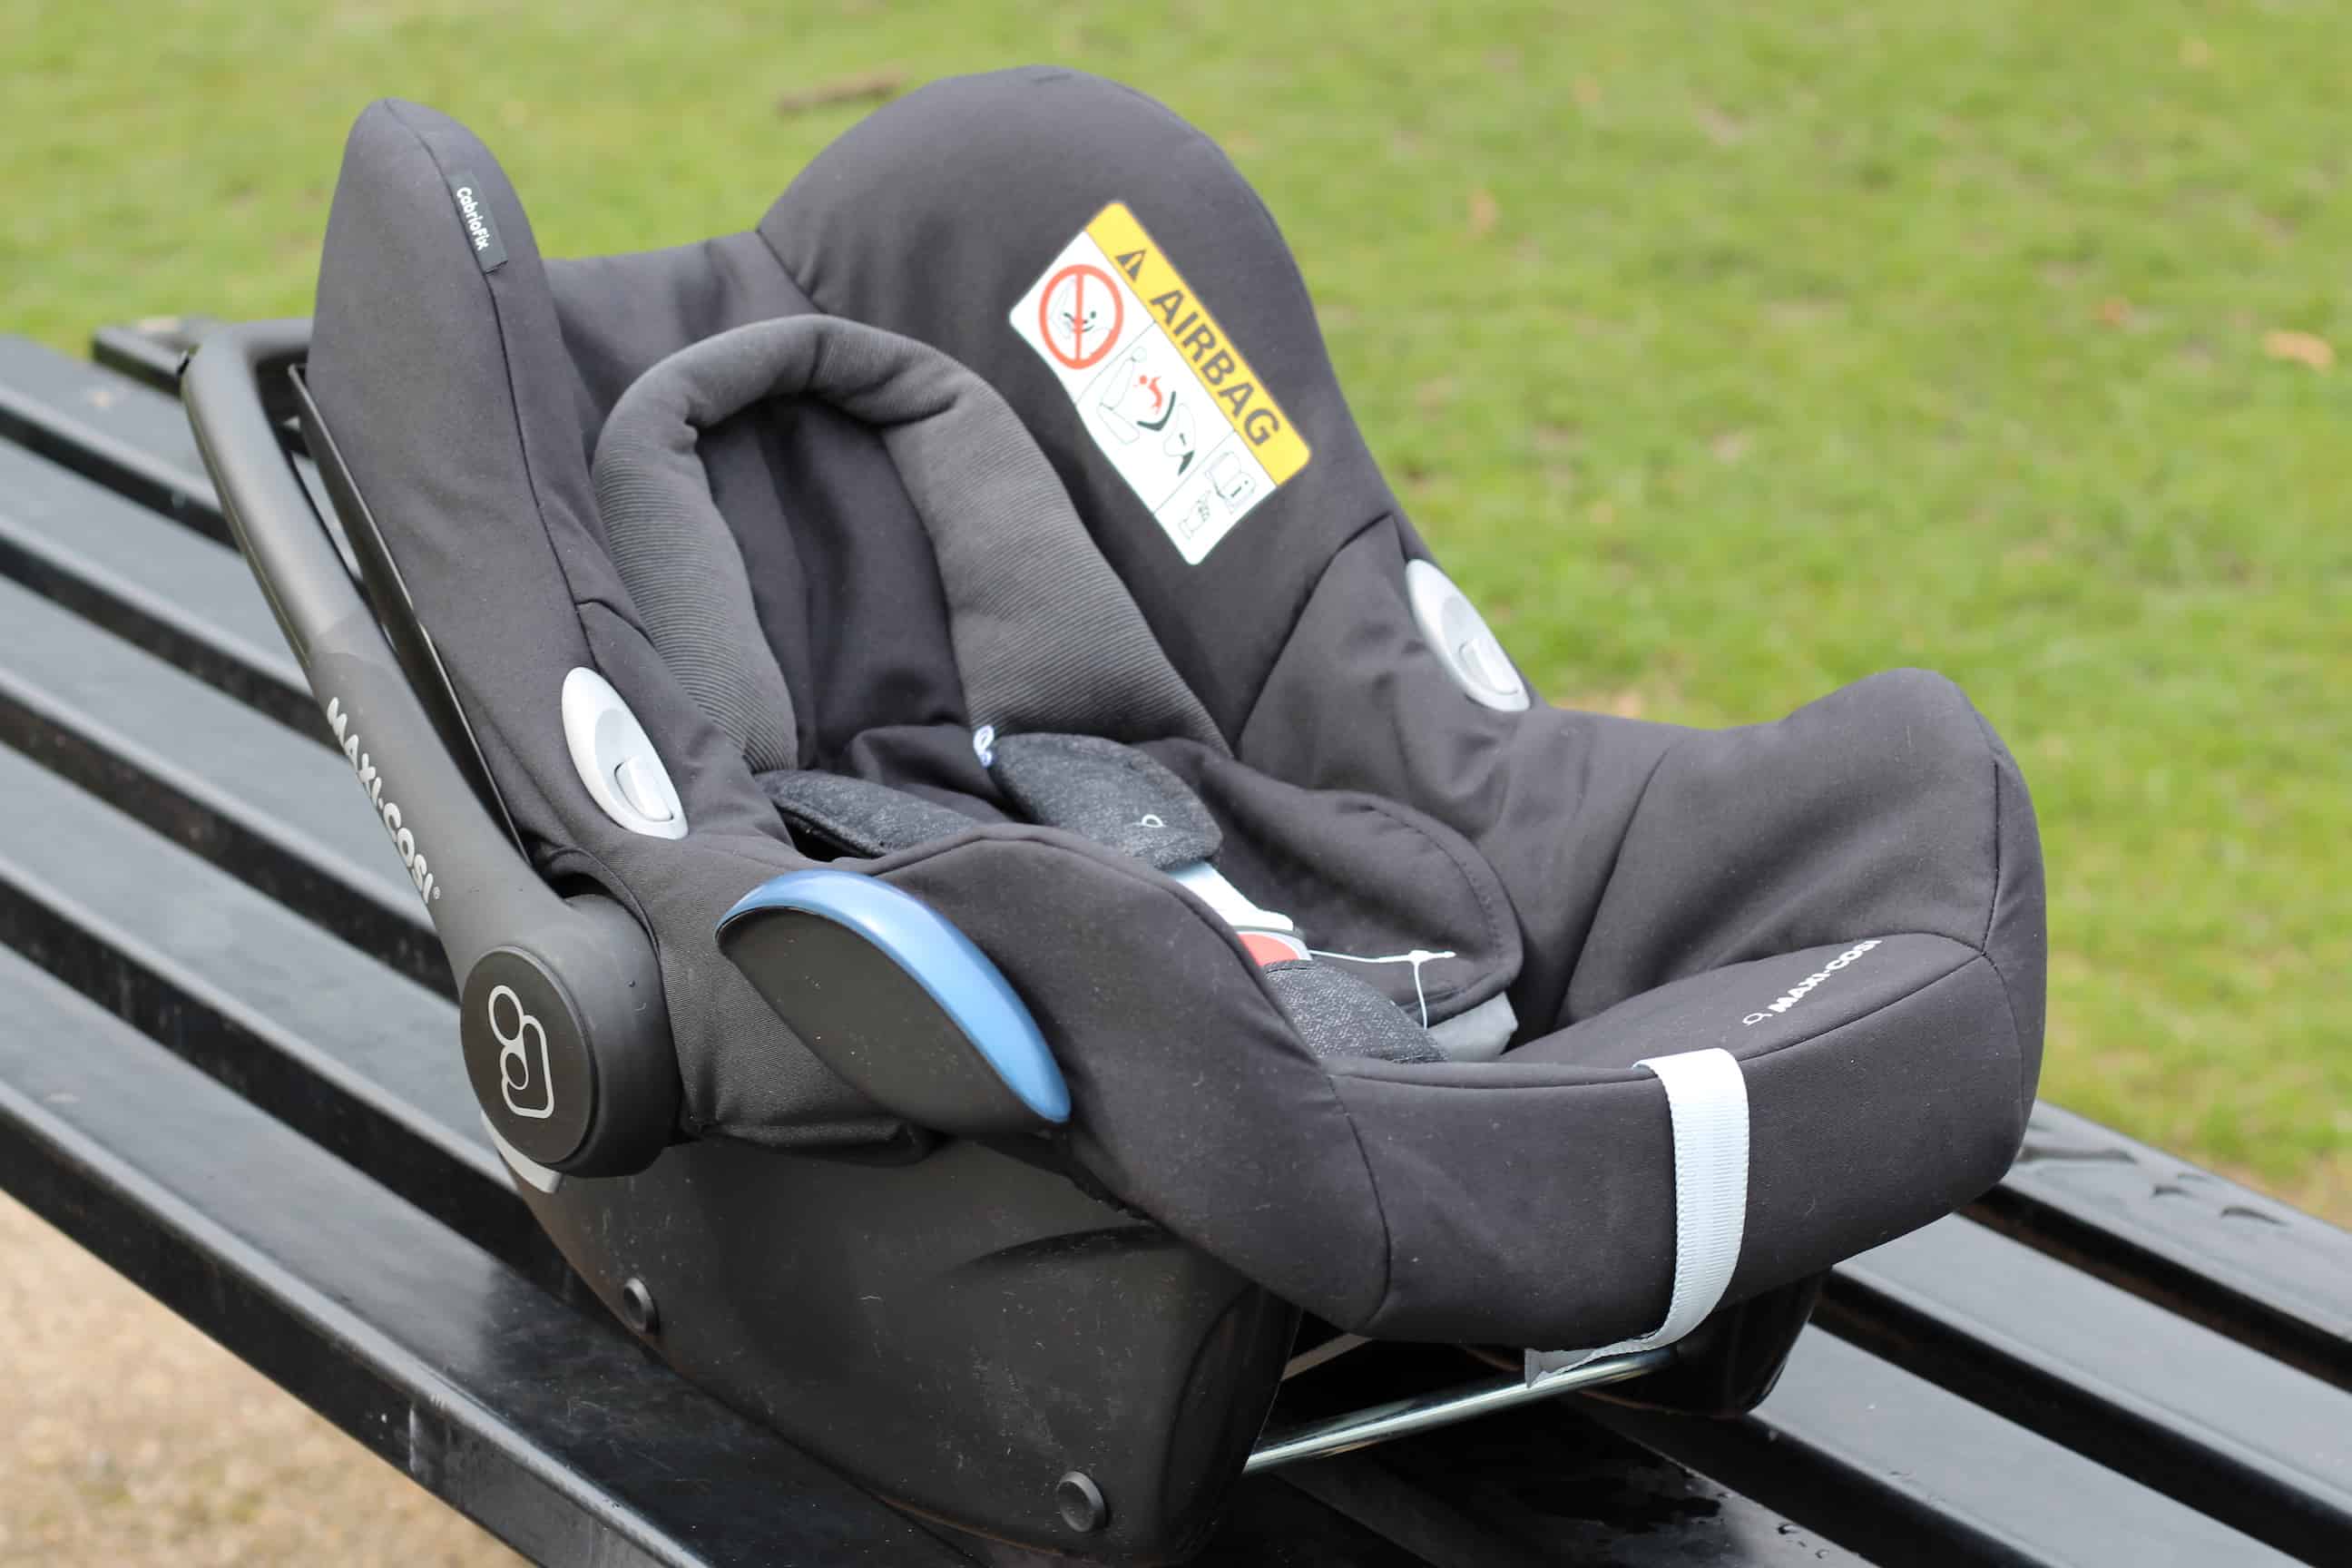 wolf Kapitein Brie krekel Maxi Cosi CabrioFix Car Seat Group 0+ Review - Soph-obsessed